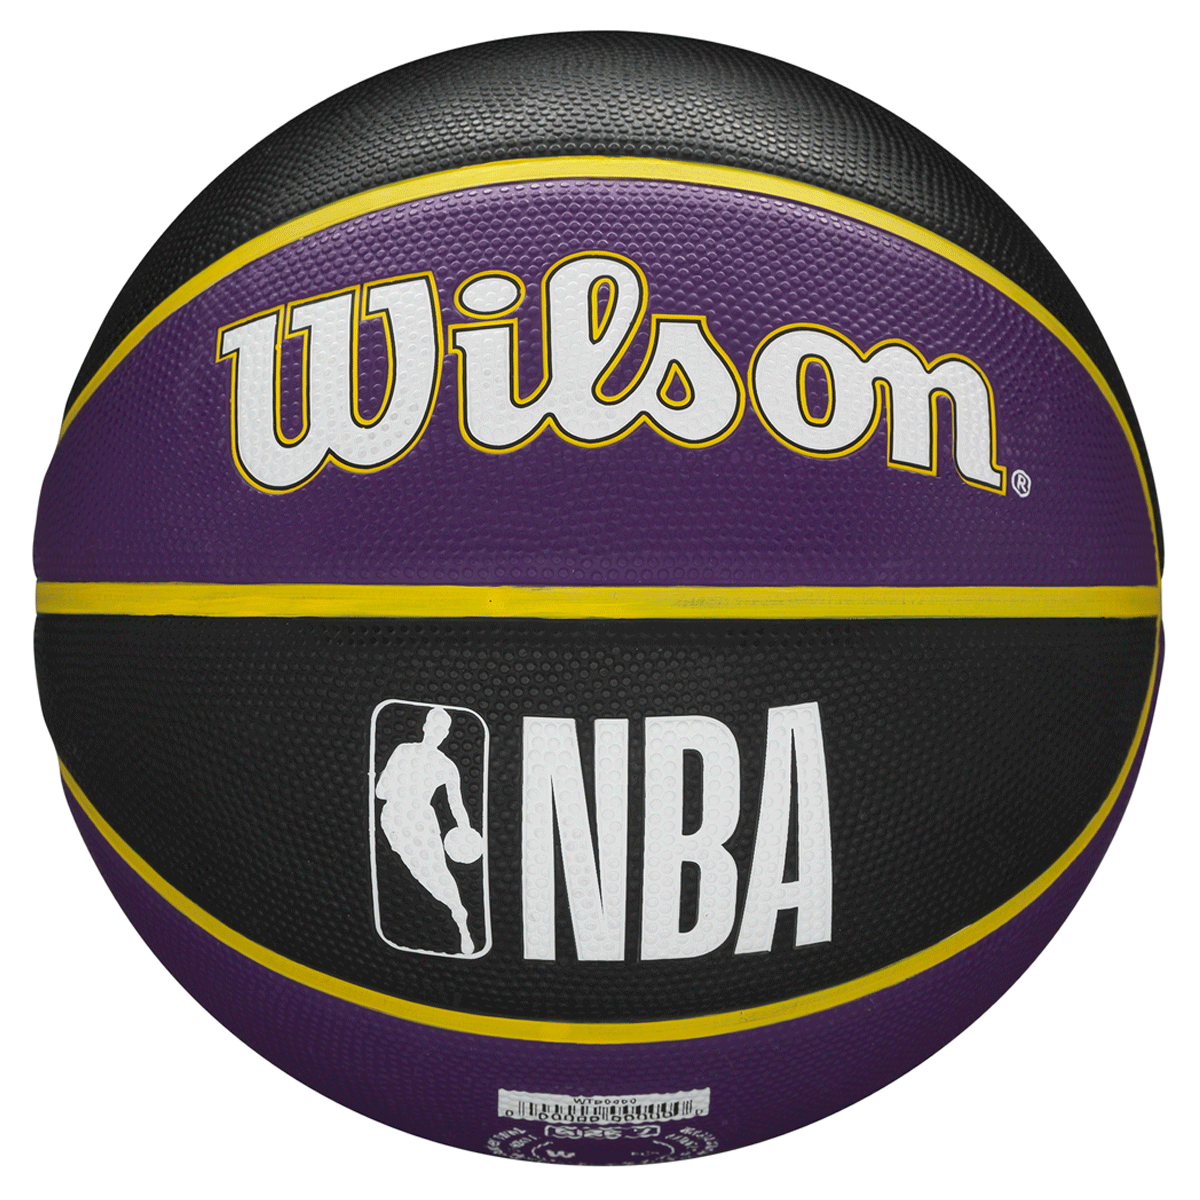 NBA is switching official game ball to Wilson brand - Los Angeles